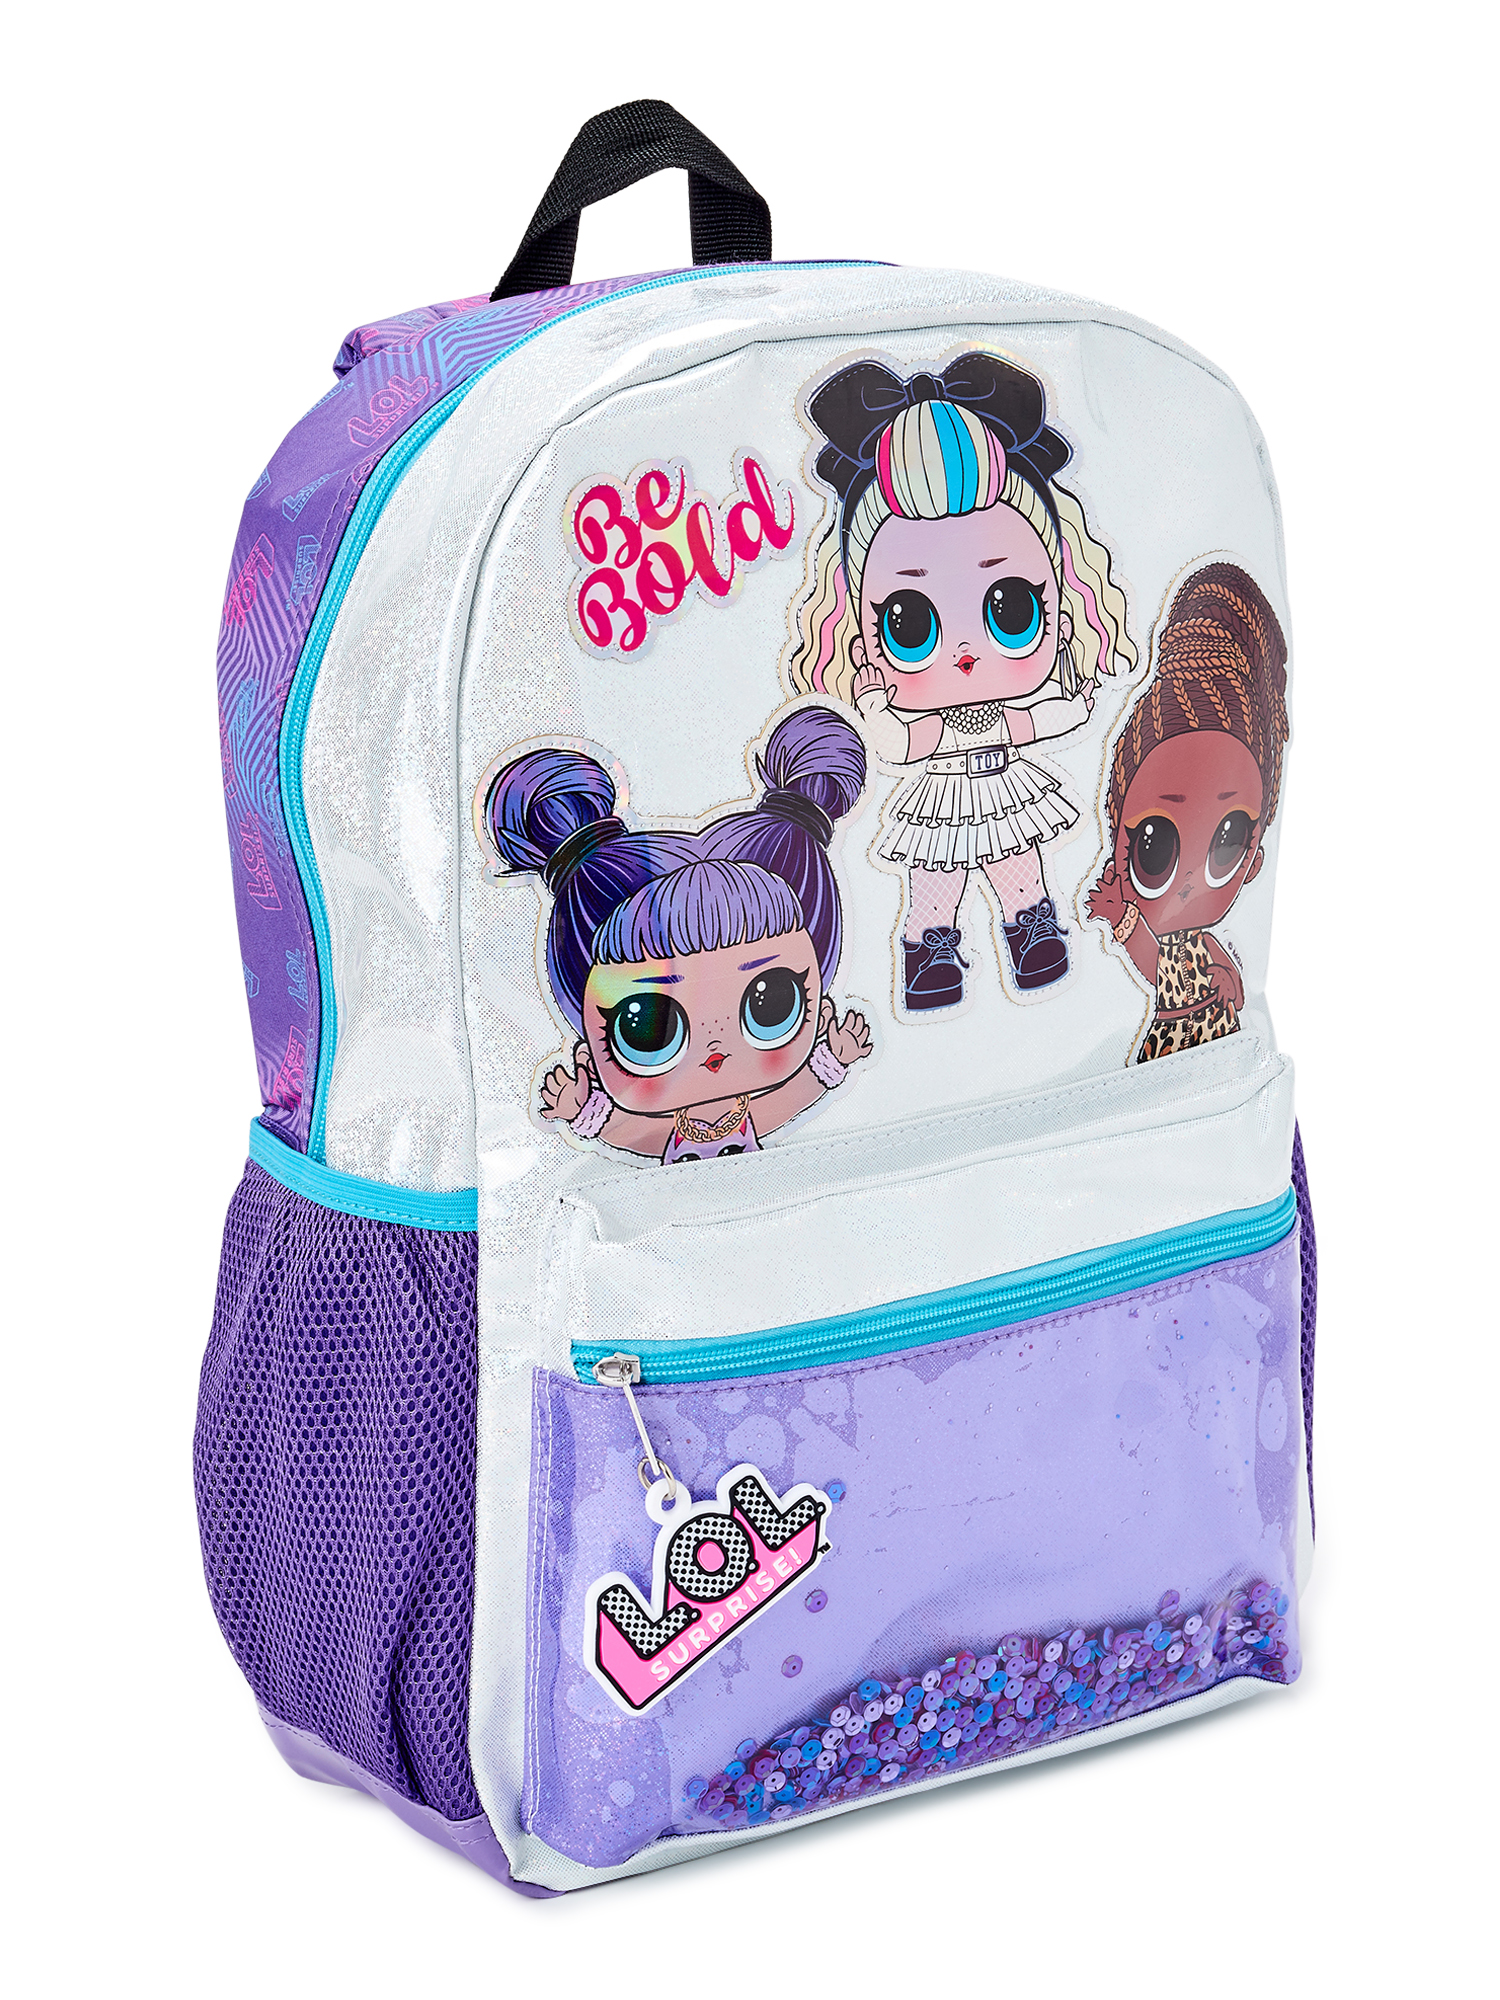 L.O.L. Surprise! Girls' Be Bold Glitter Purple Backpack - image 3 of 6